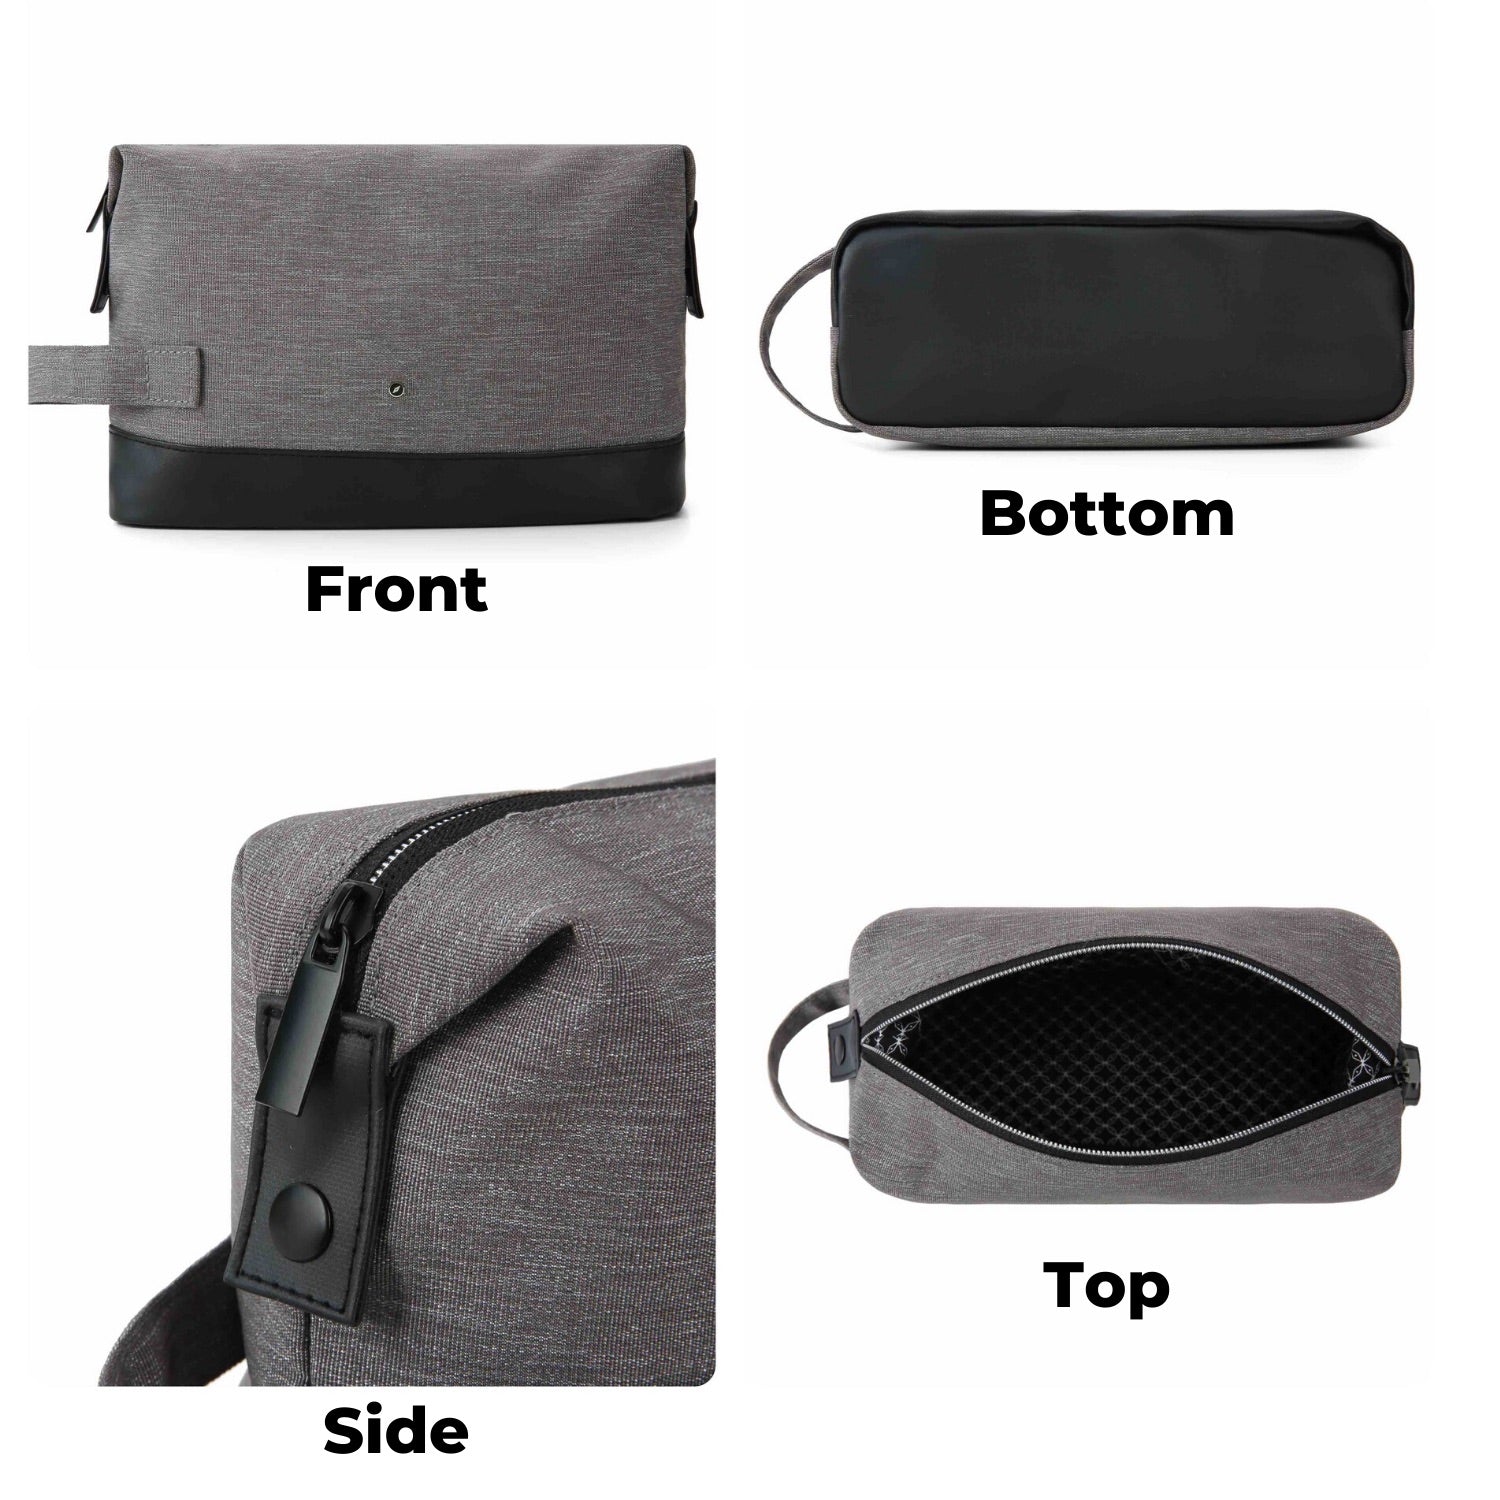 Travel Toiletry Bag with transparent TSA bags and silicone bottles by GILBANO